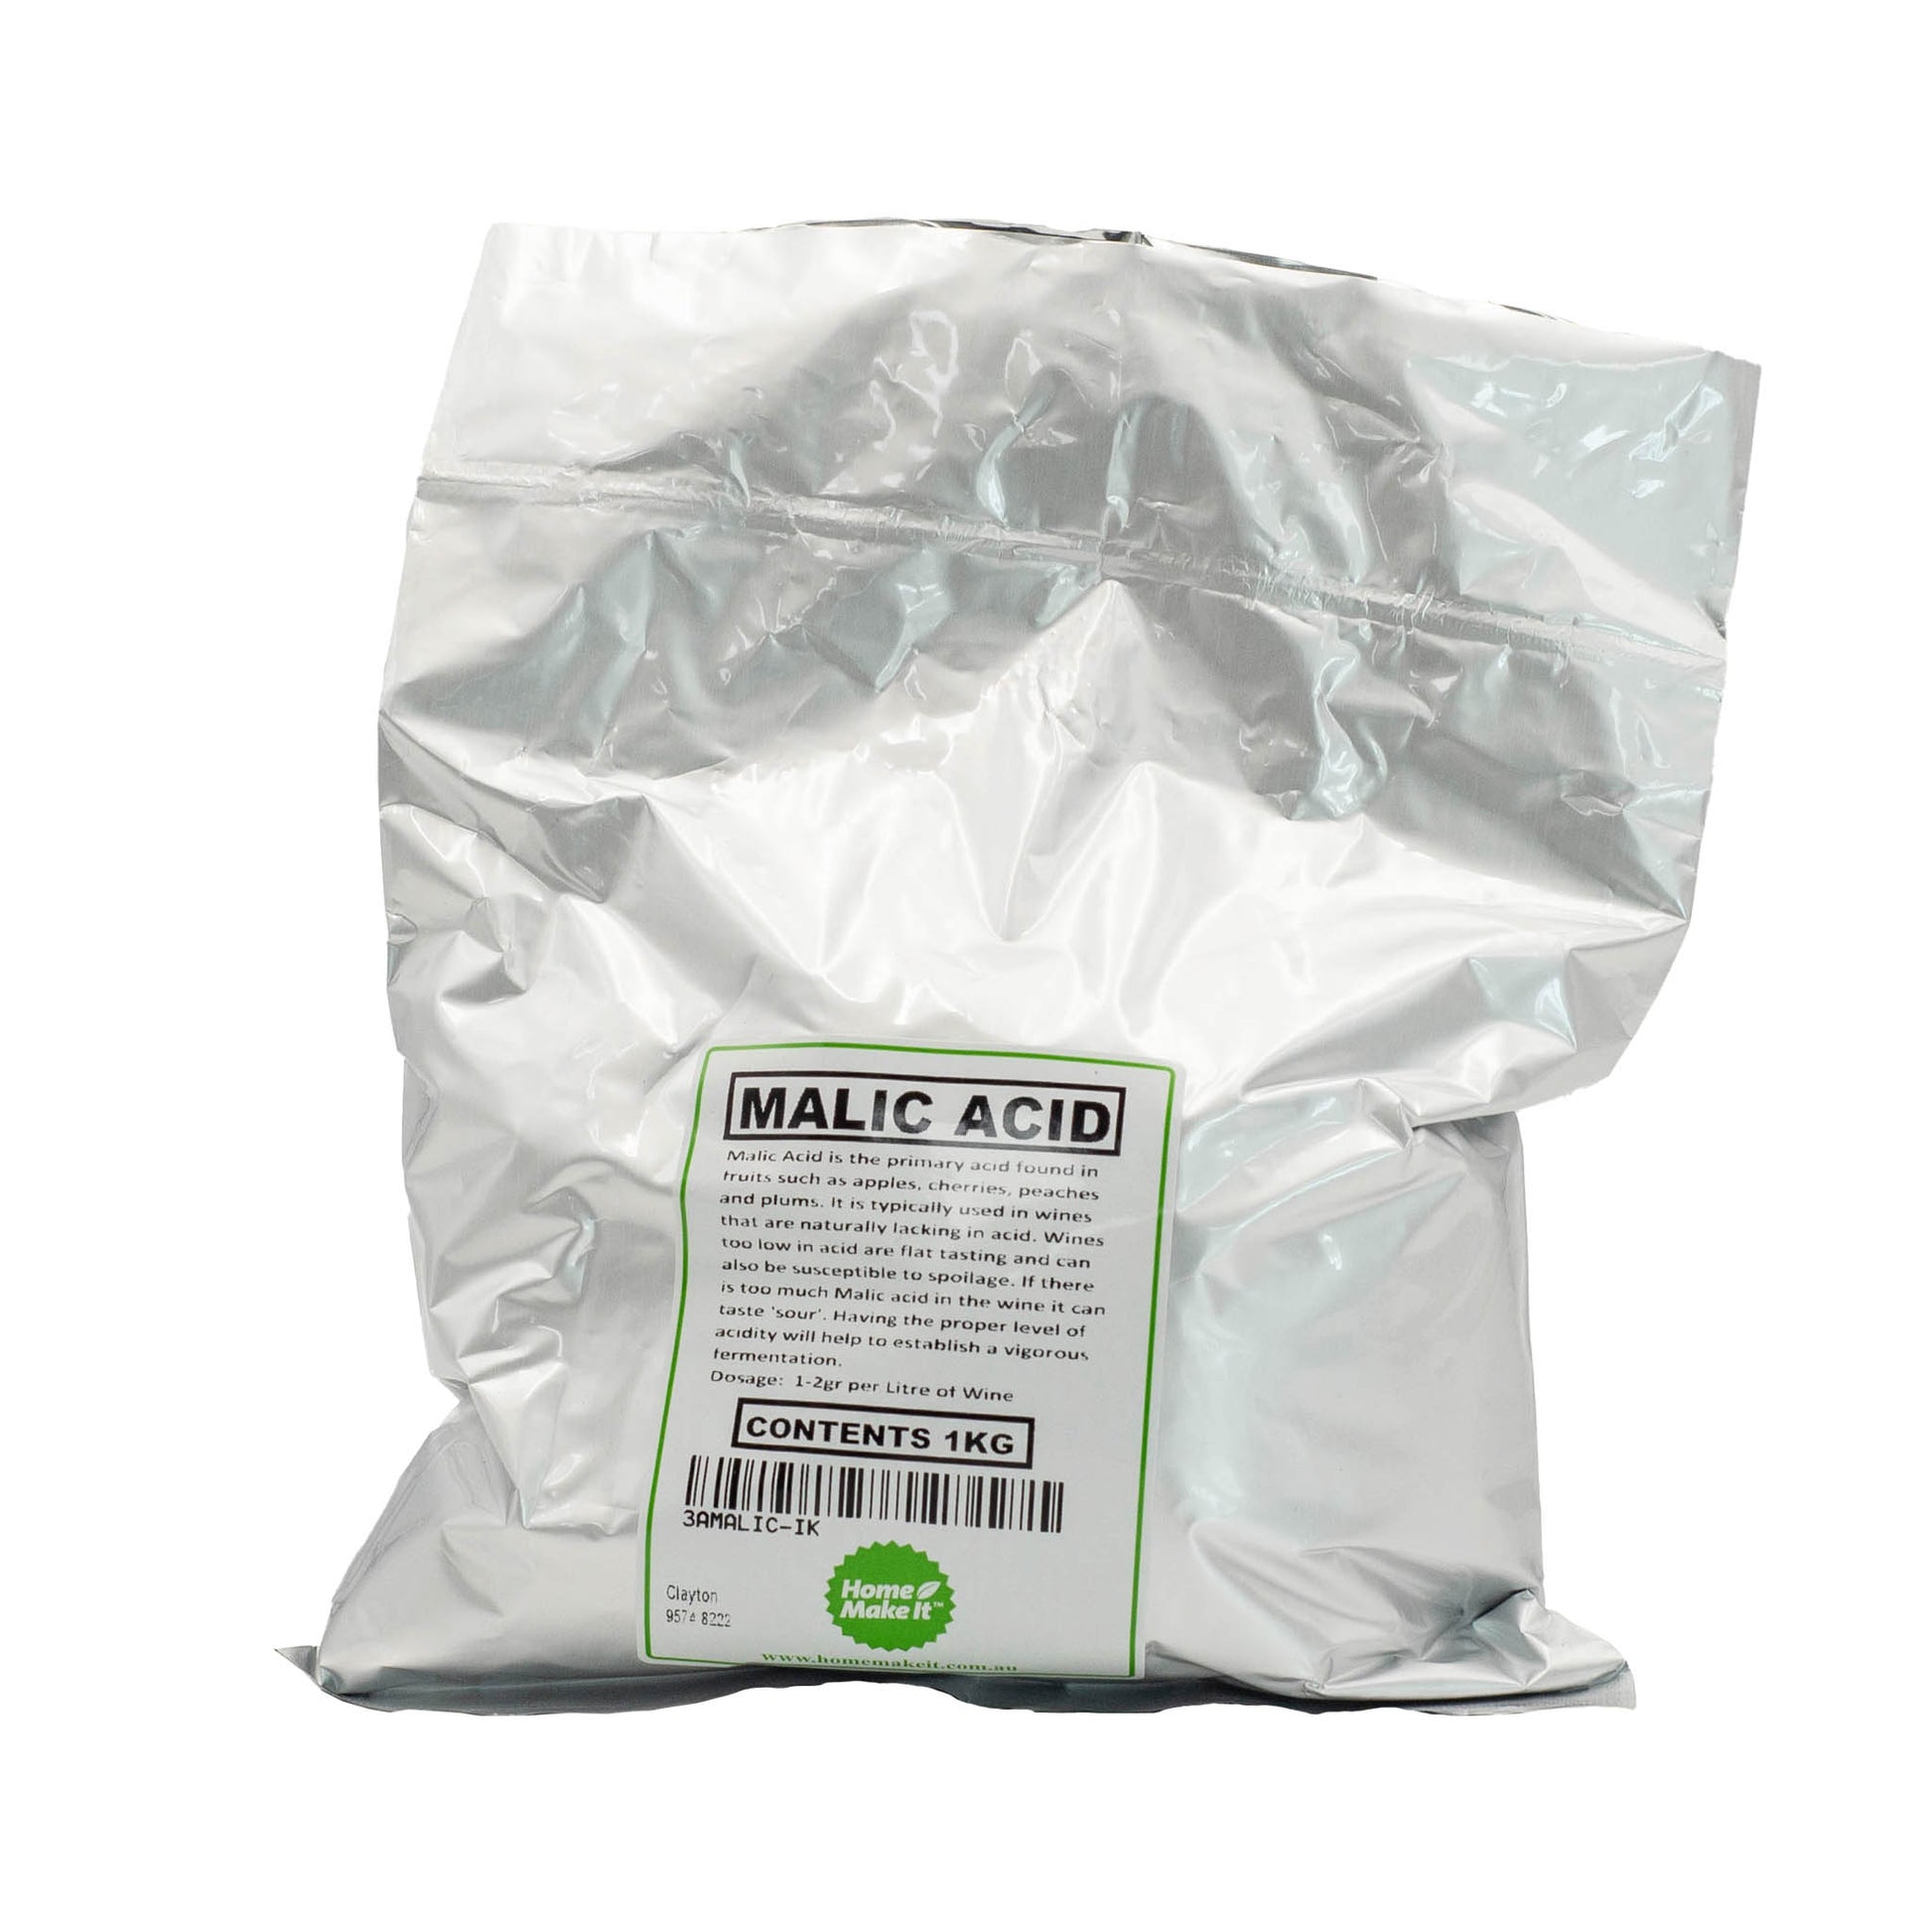 1kg bag of malic acid. Used in wines that are lacking in acid. 